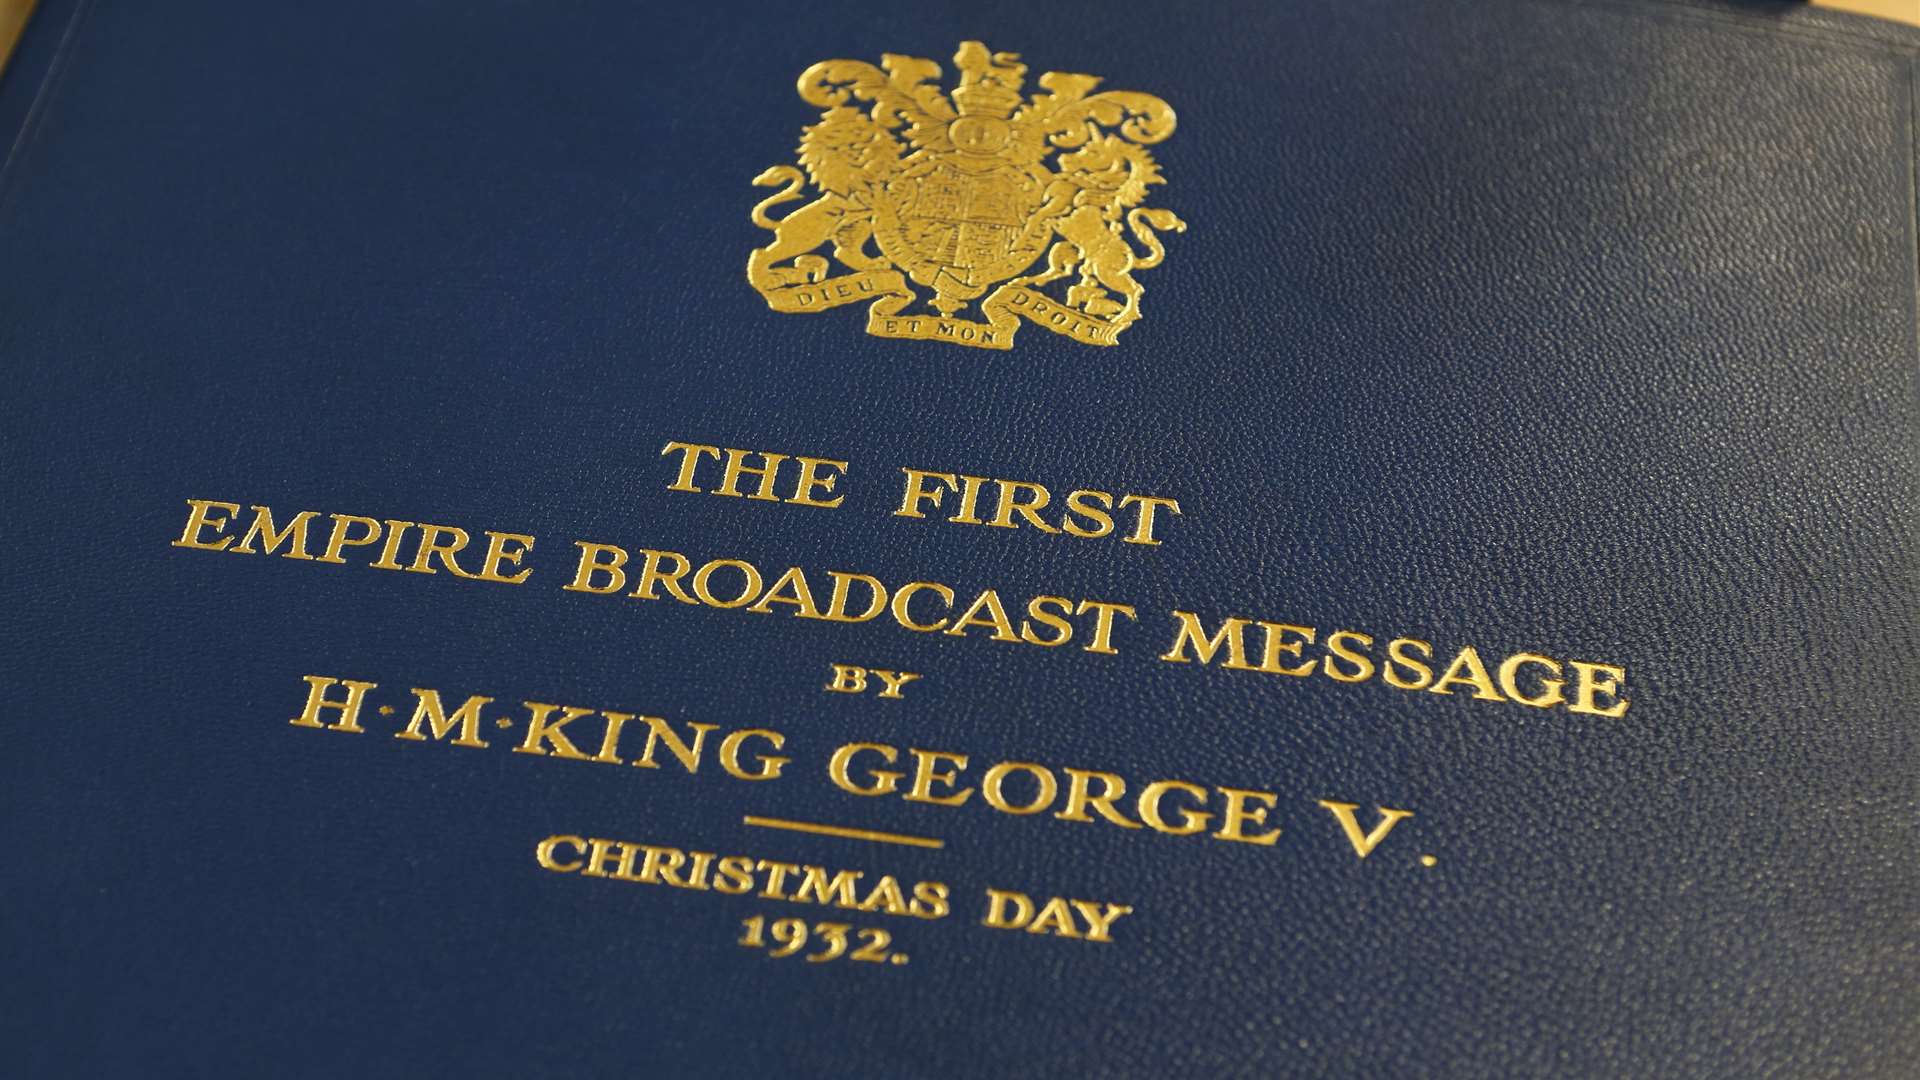 The leather-bound cover of the King's speech